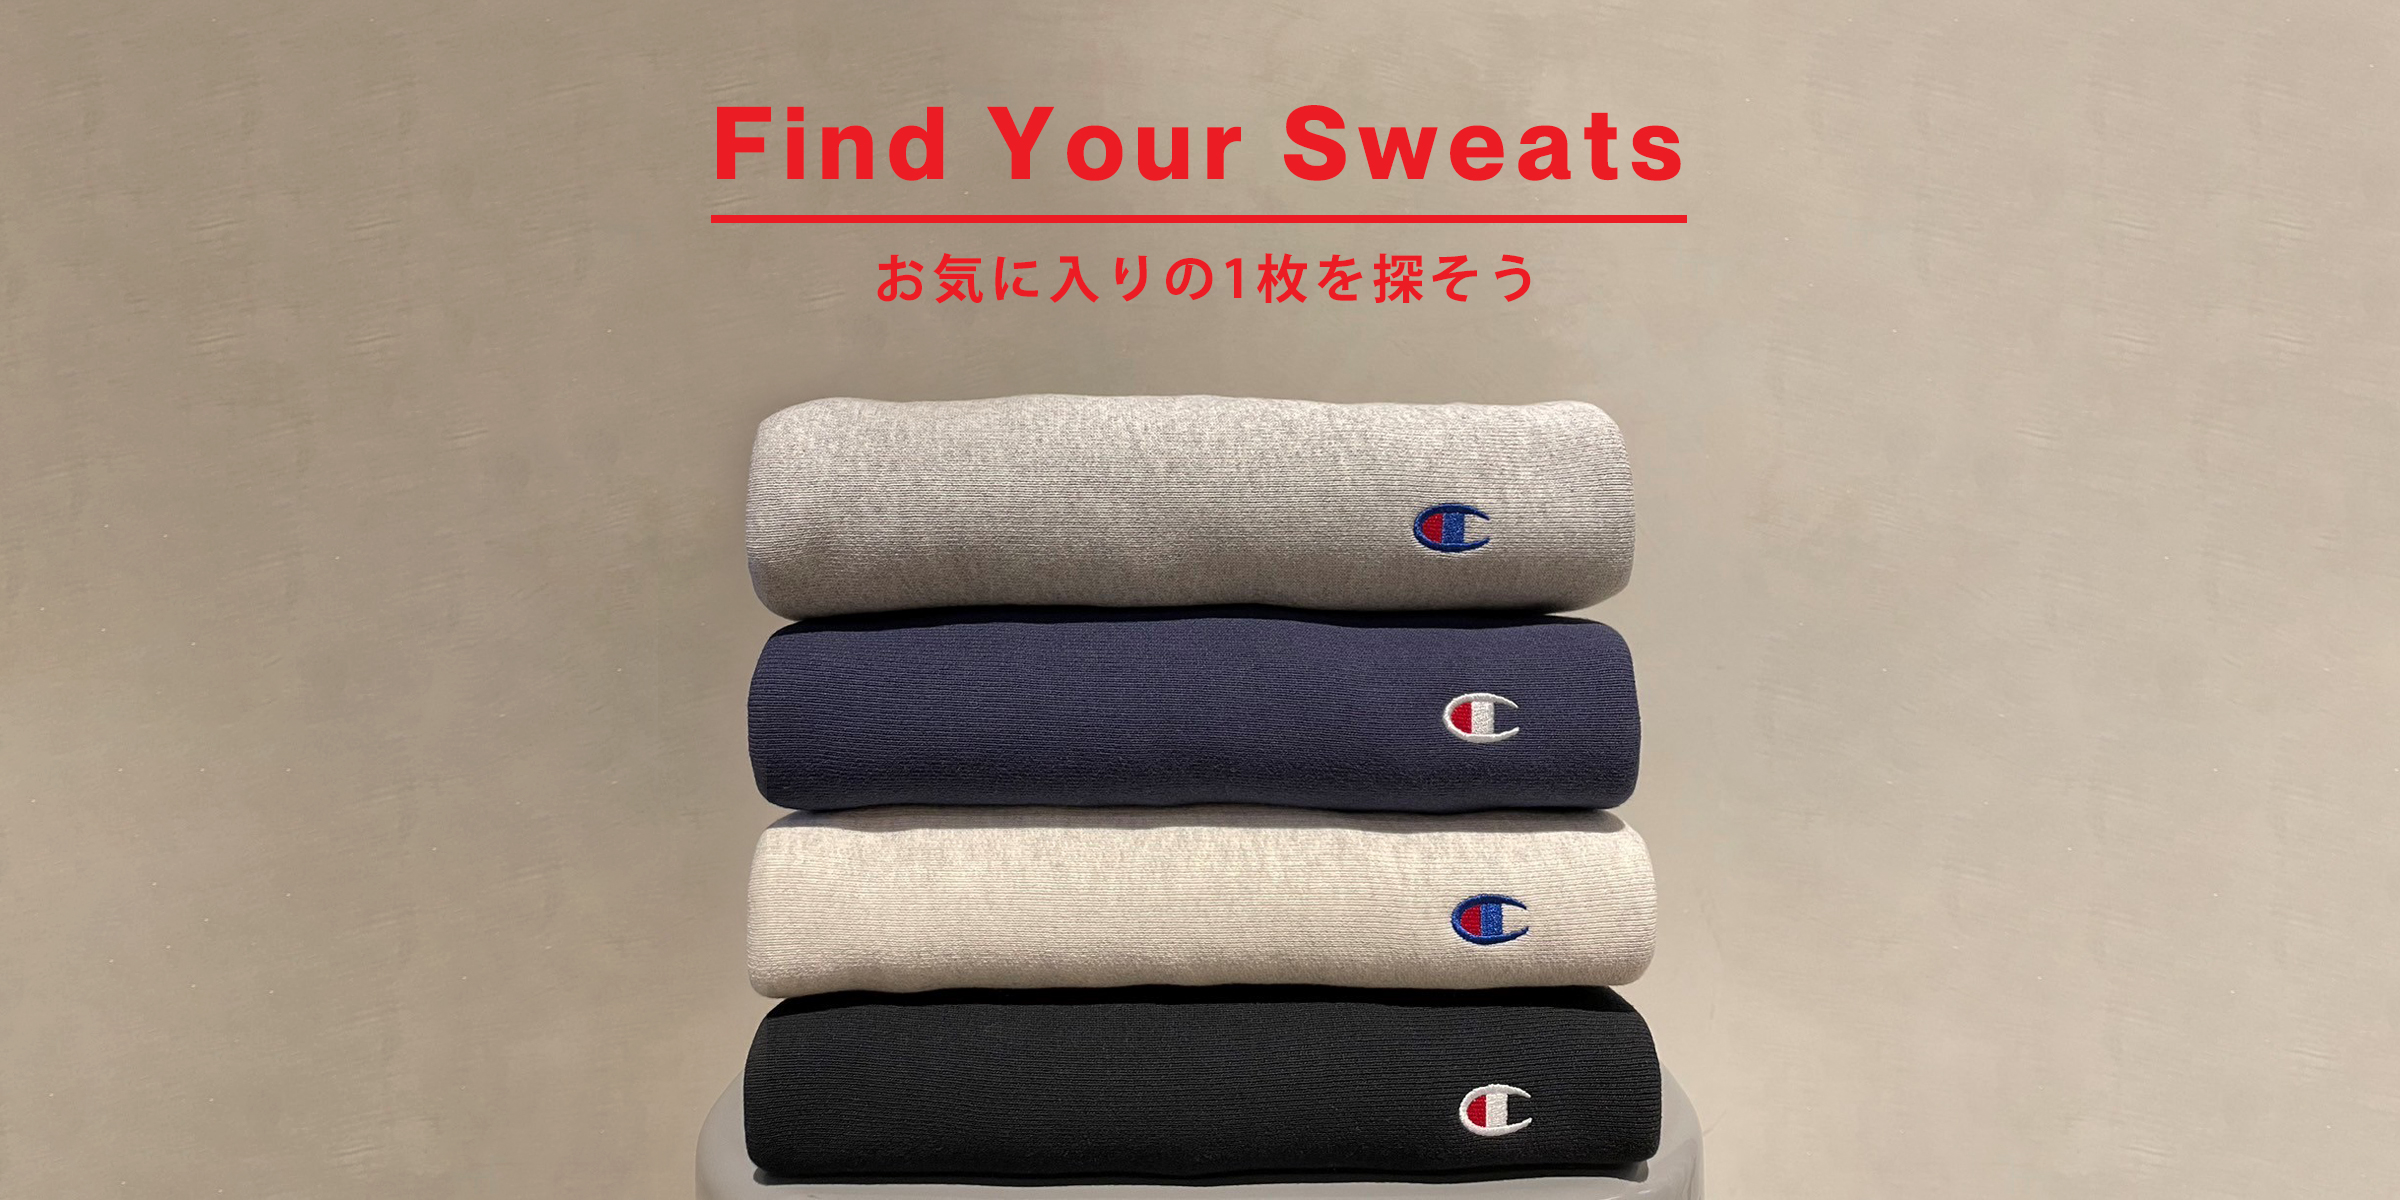 Find Your Sweats